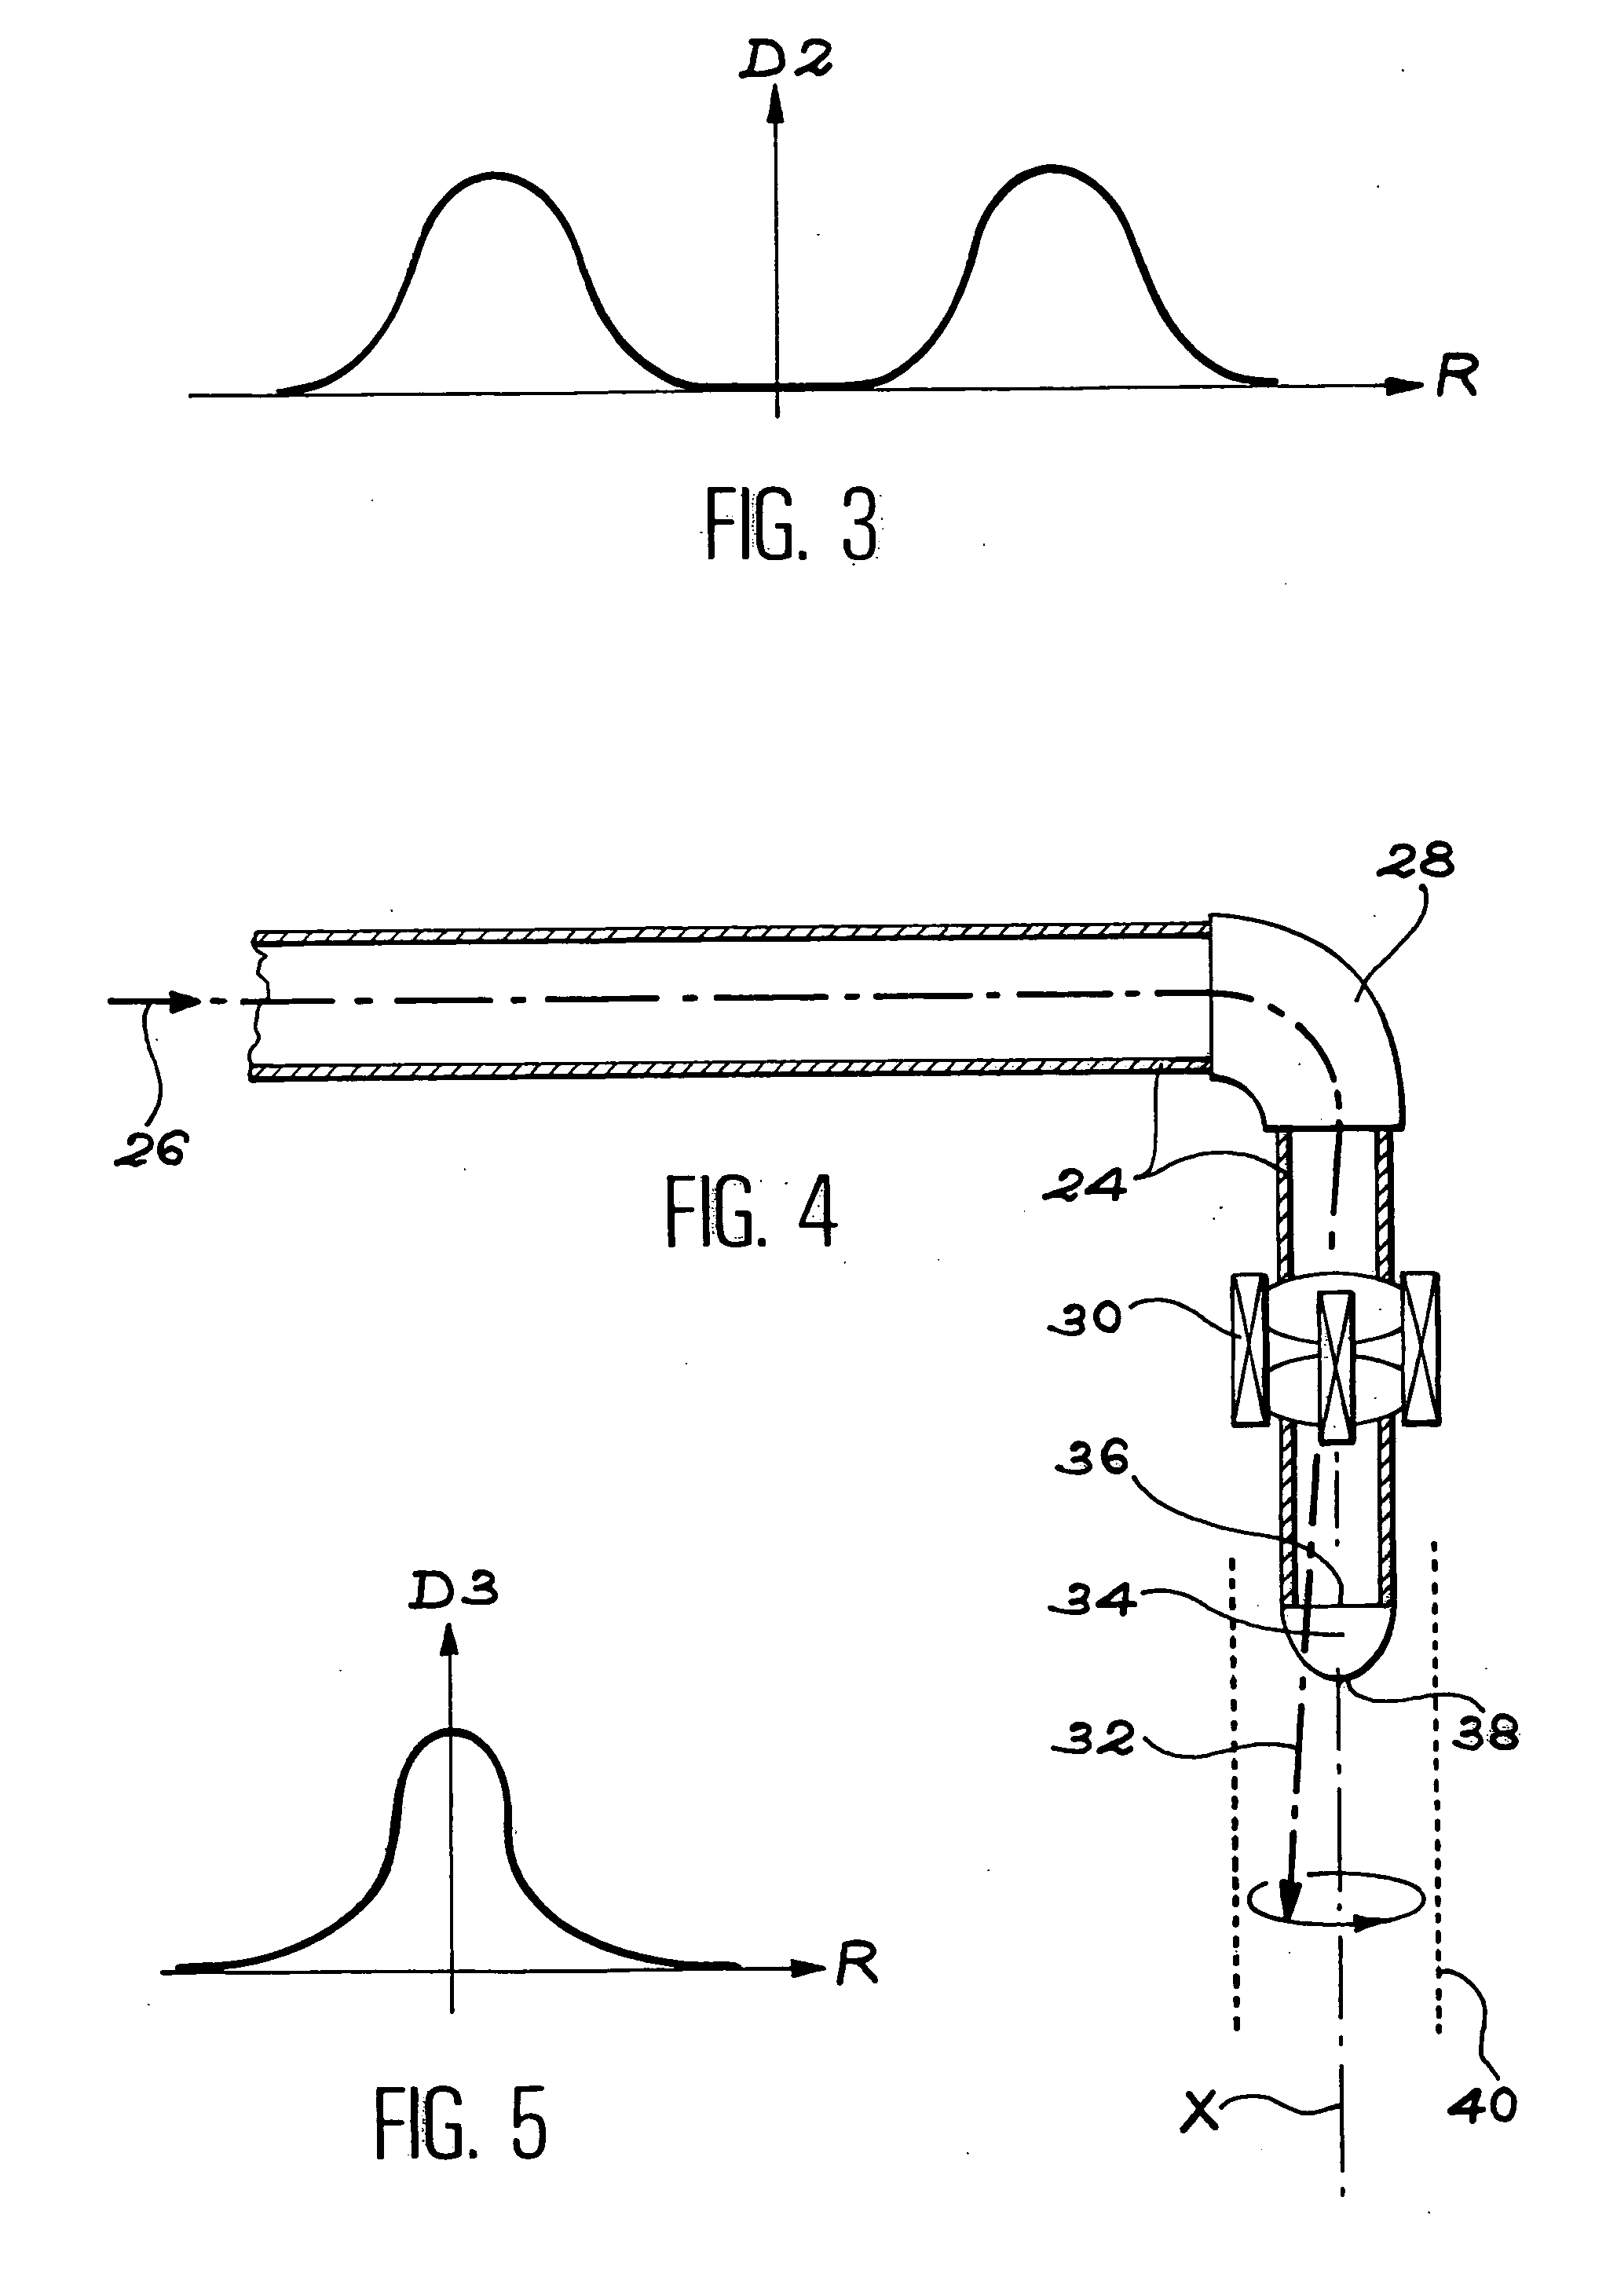 Spallation device for producing neutrons